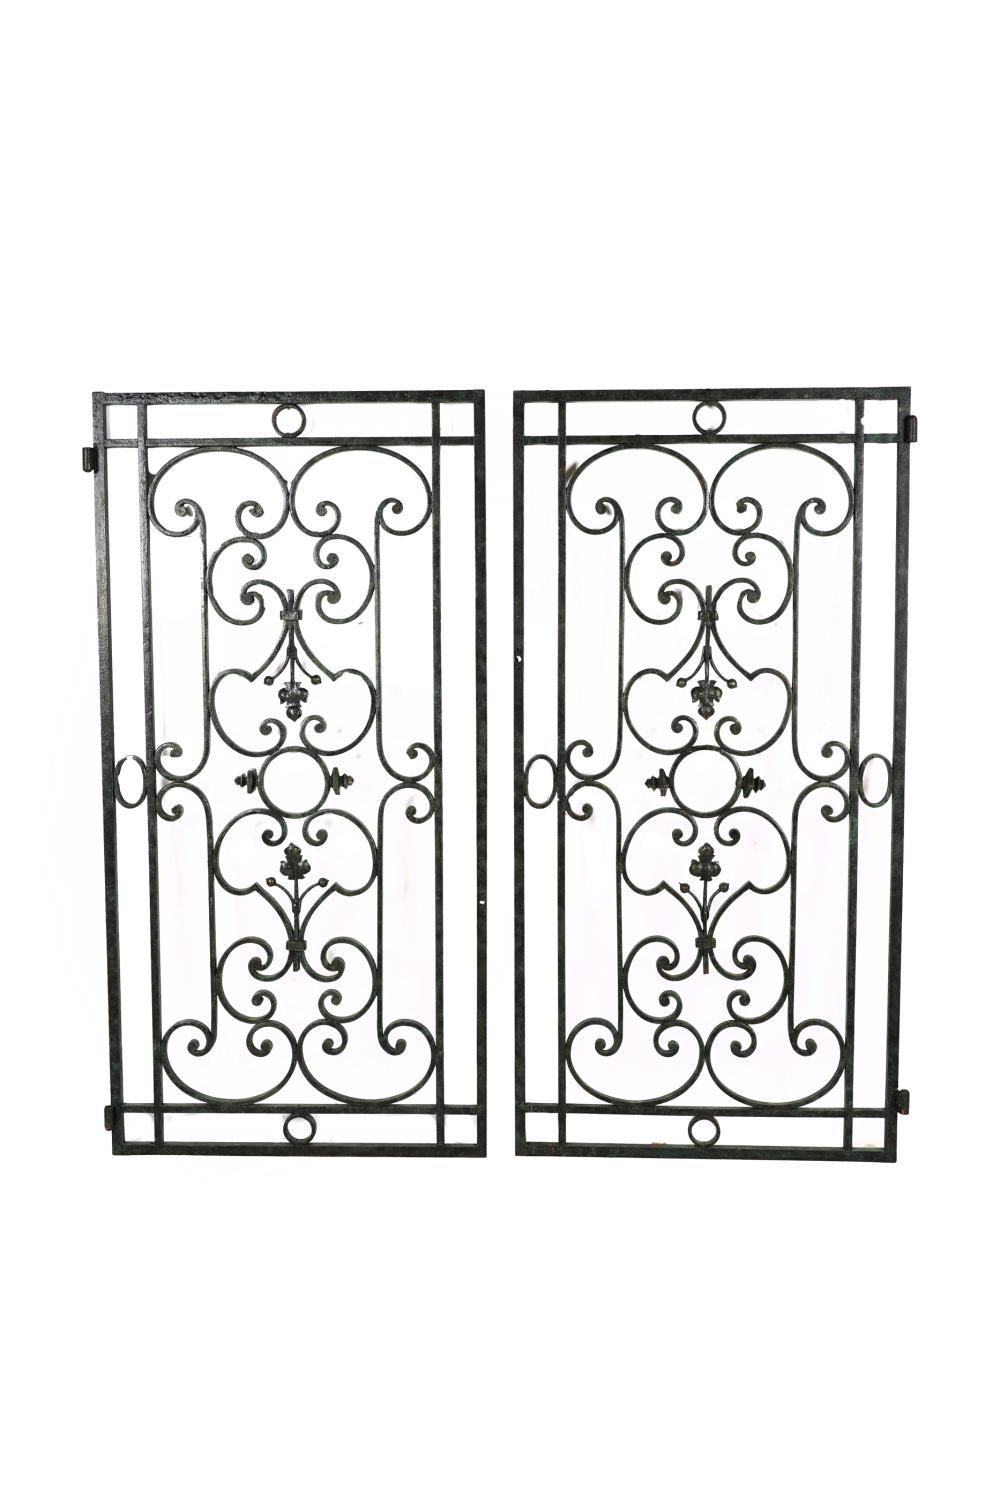 PAIR OF FRENCH IRON GATESCondition: